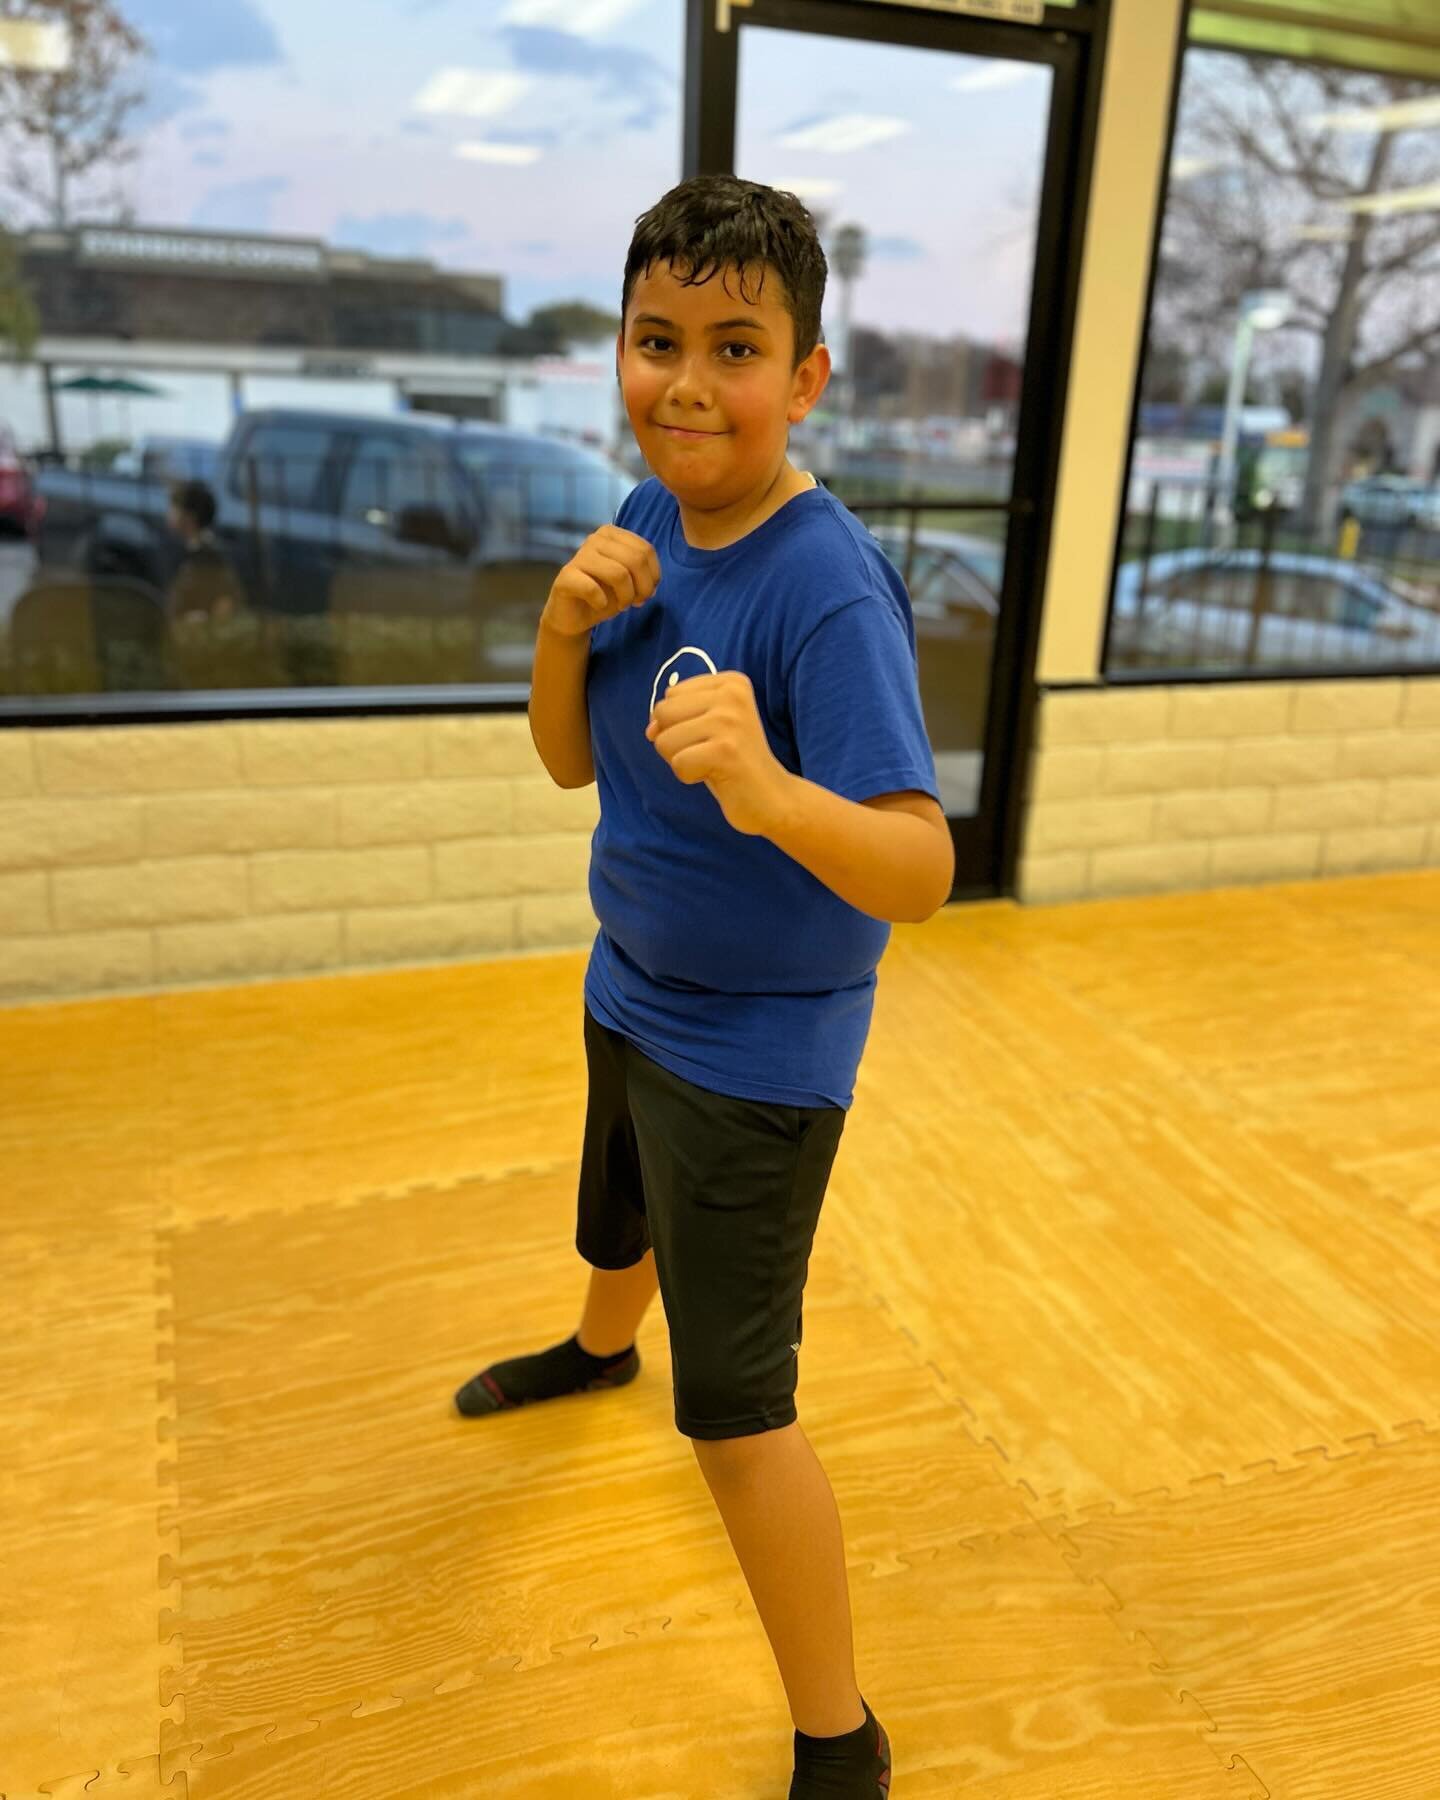 Let&rsquo;s welcome Damian to Premier Martial Arts Academy!!👏🏽😀 Damian is an all-star student who&rsquo;s beginning a wonderful journey of discipline and respect through our Martial Arts Academy! We are proud of you Damian🥋